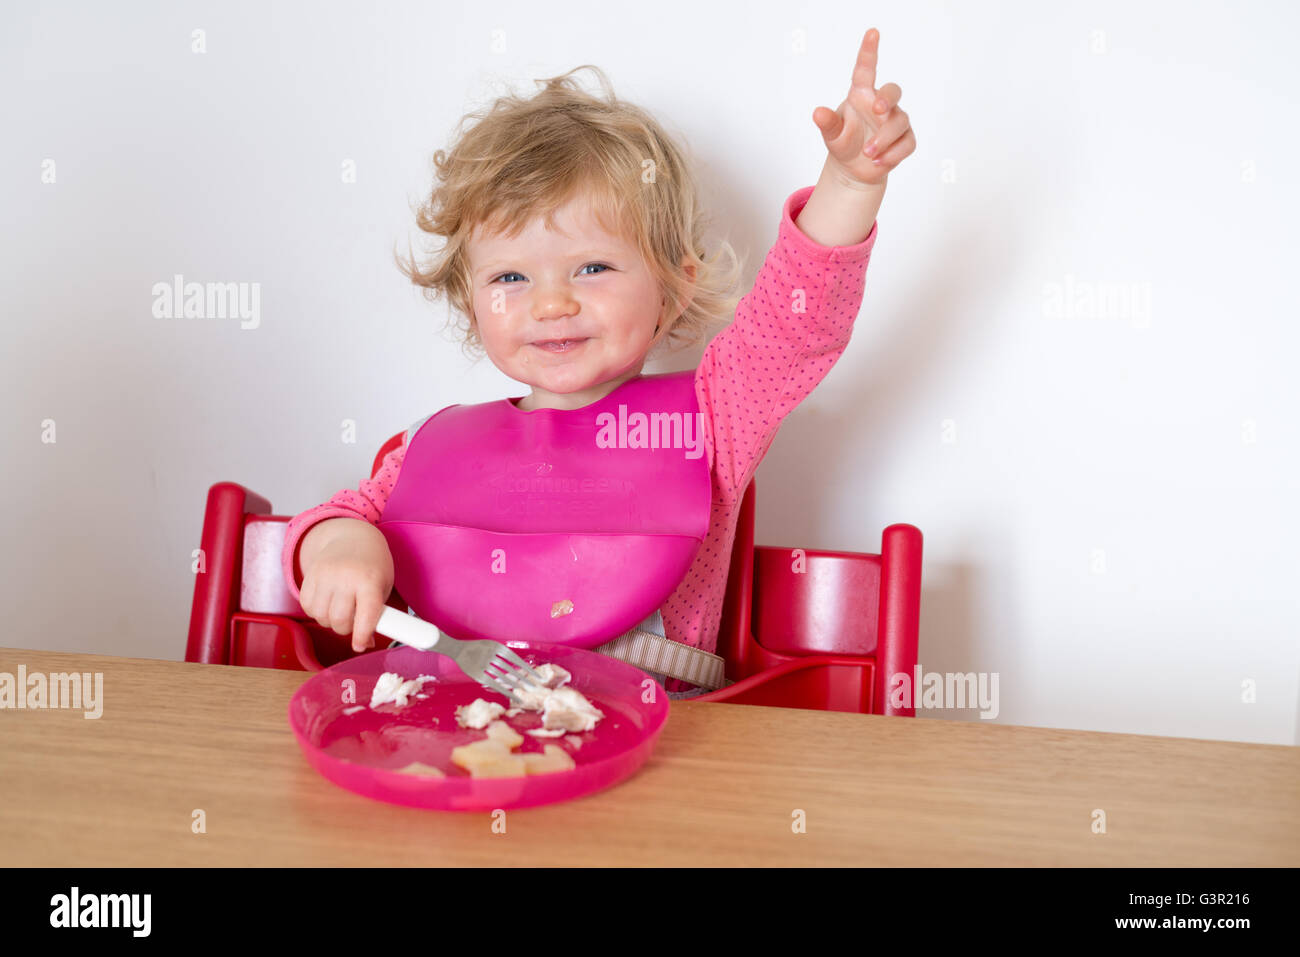 One Year Old Baby Sitting In High Chair And Eating Meal England